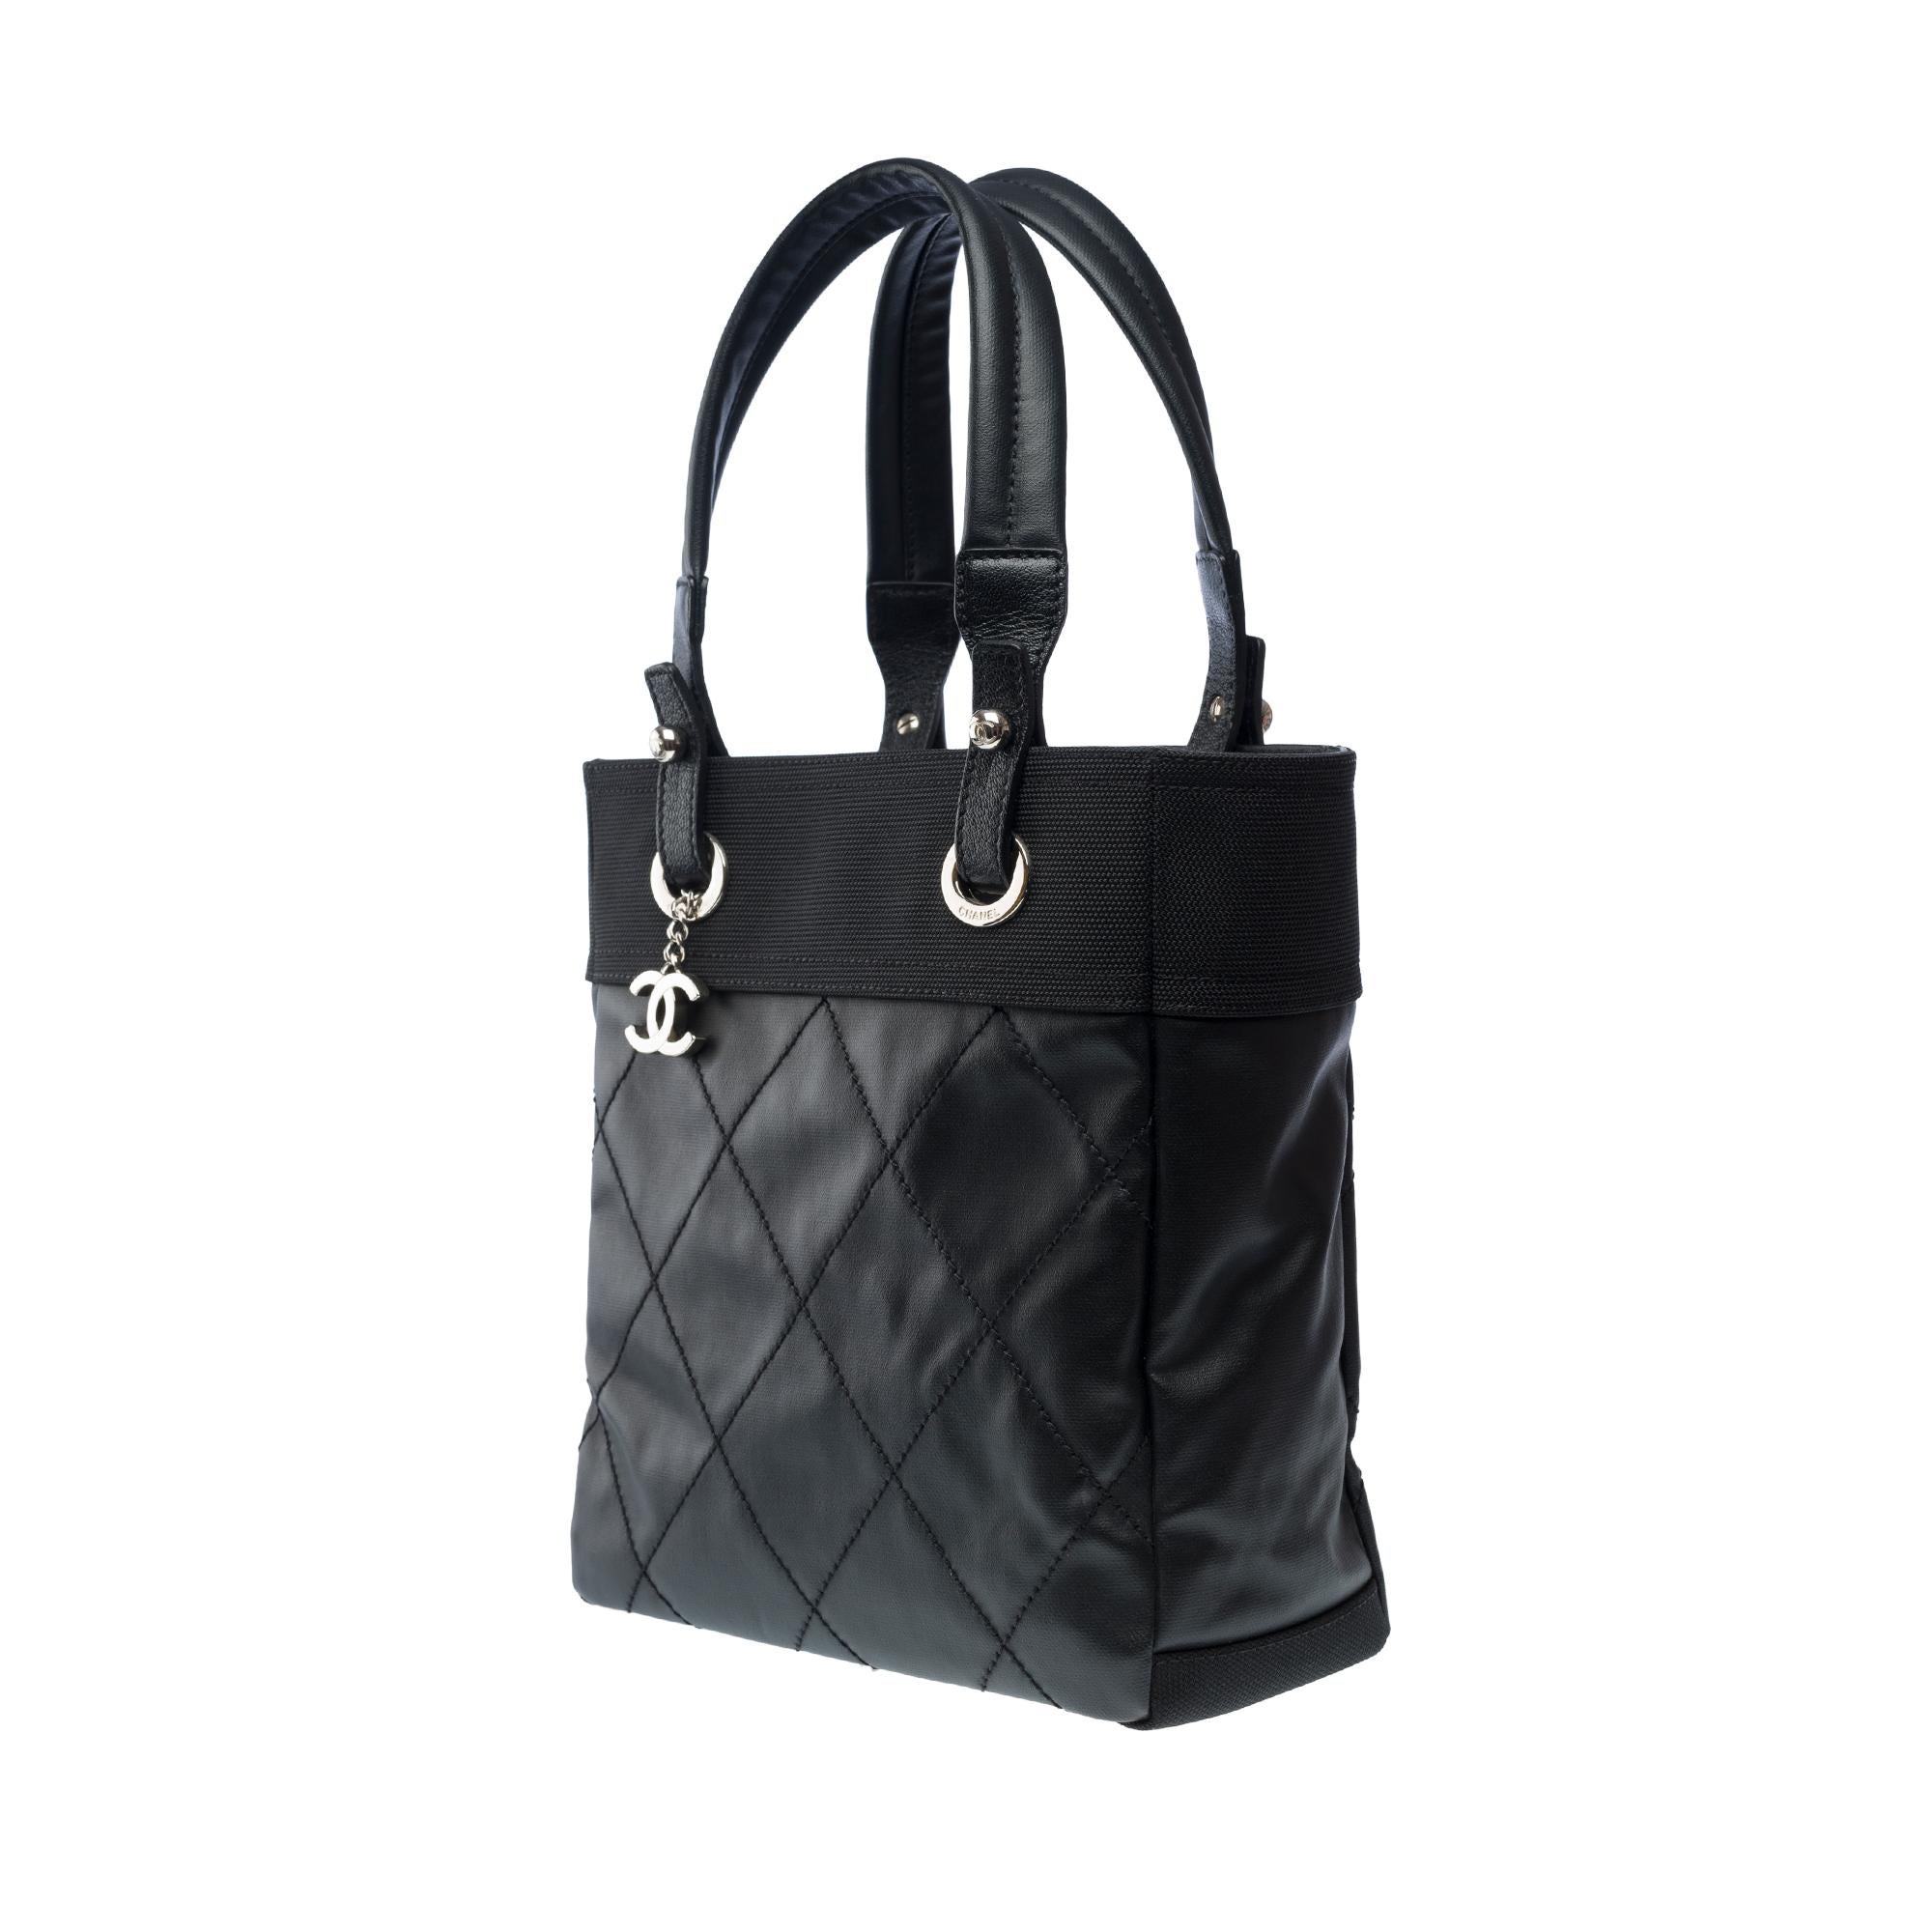  Chanel Paris-Biarritz Tote bag in black coated canvas , SHW For Sale 3